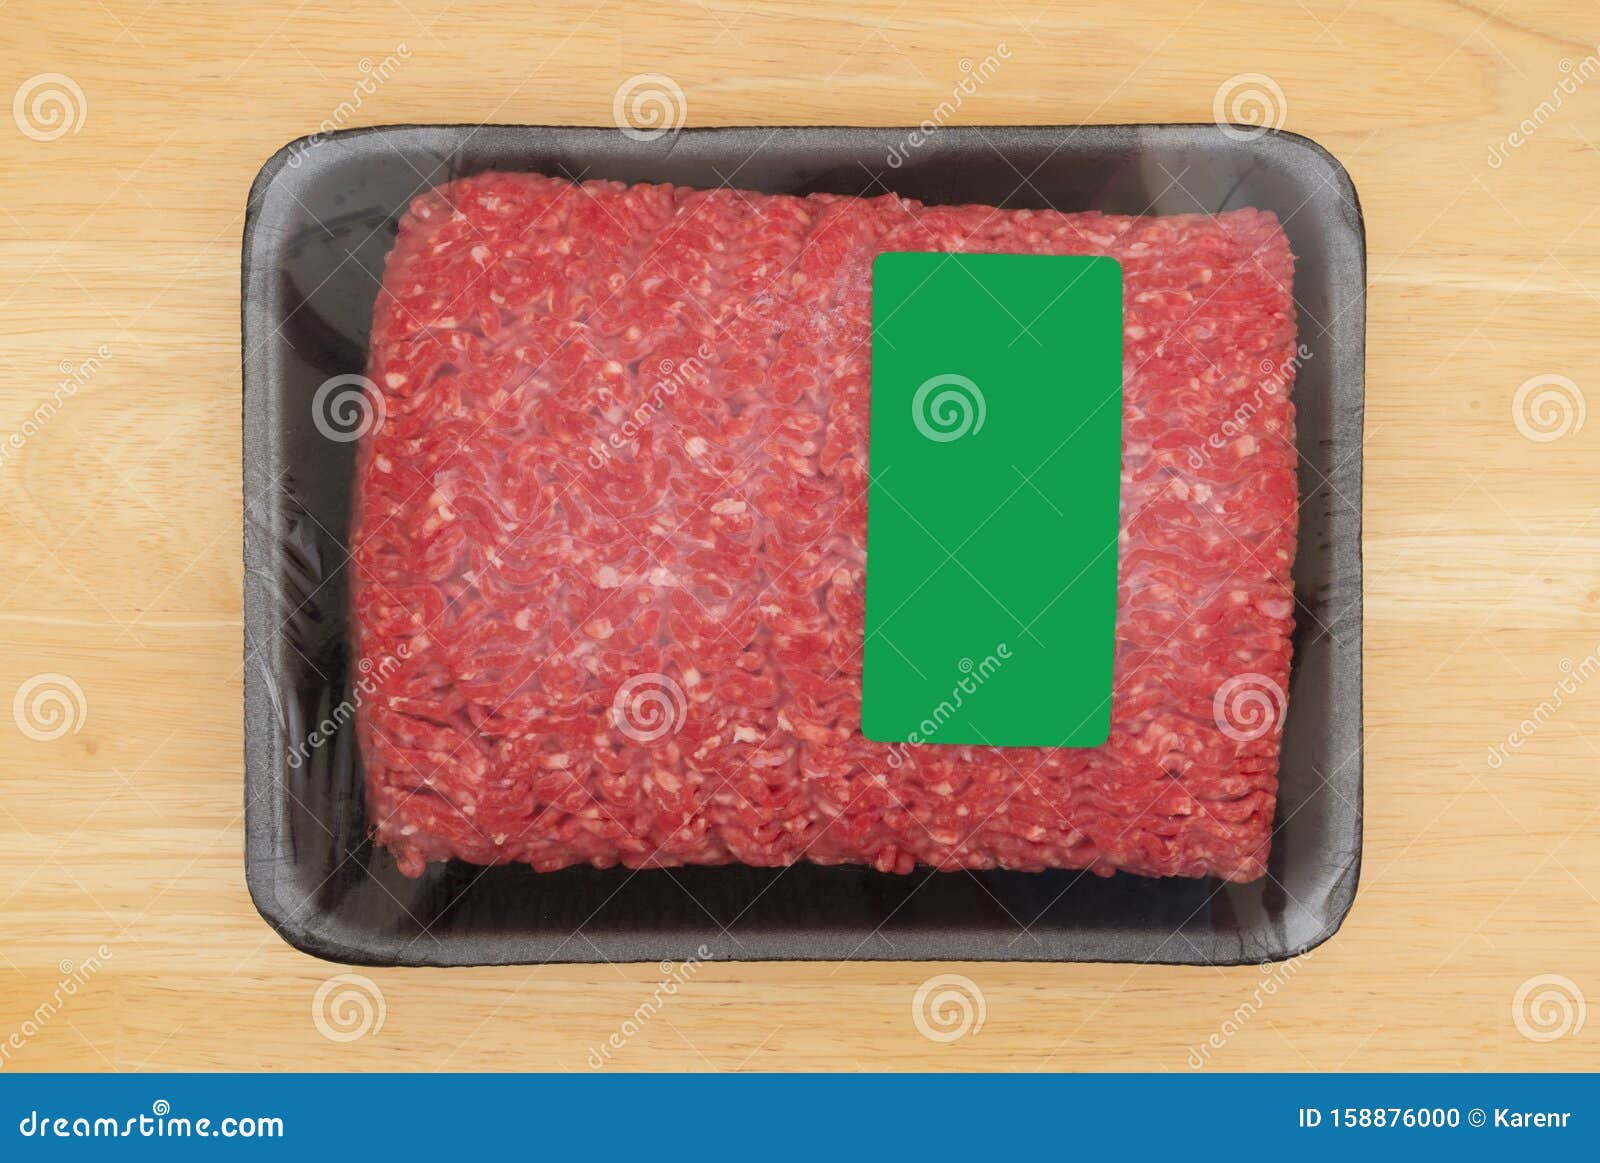 2 pounds ground beef